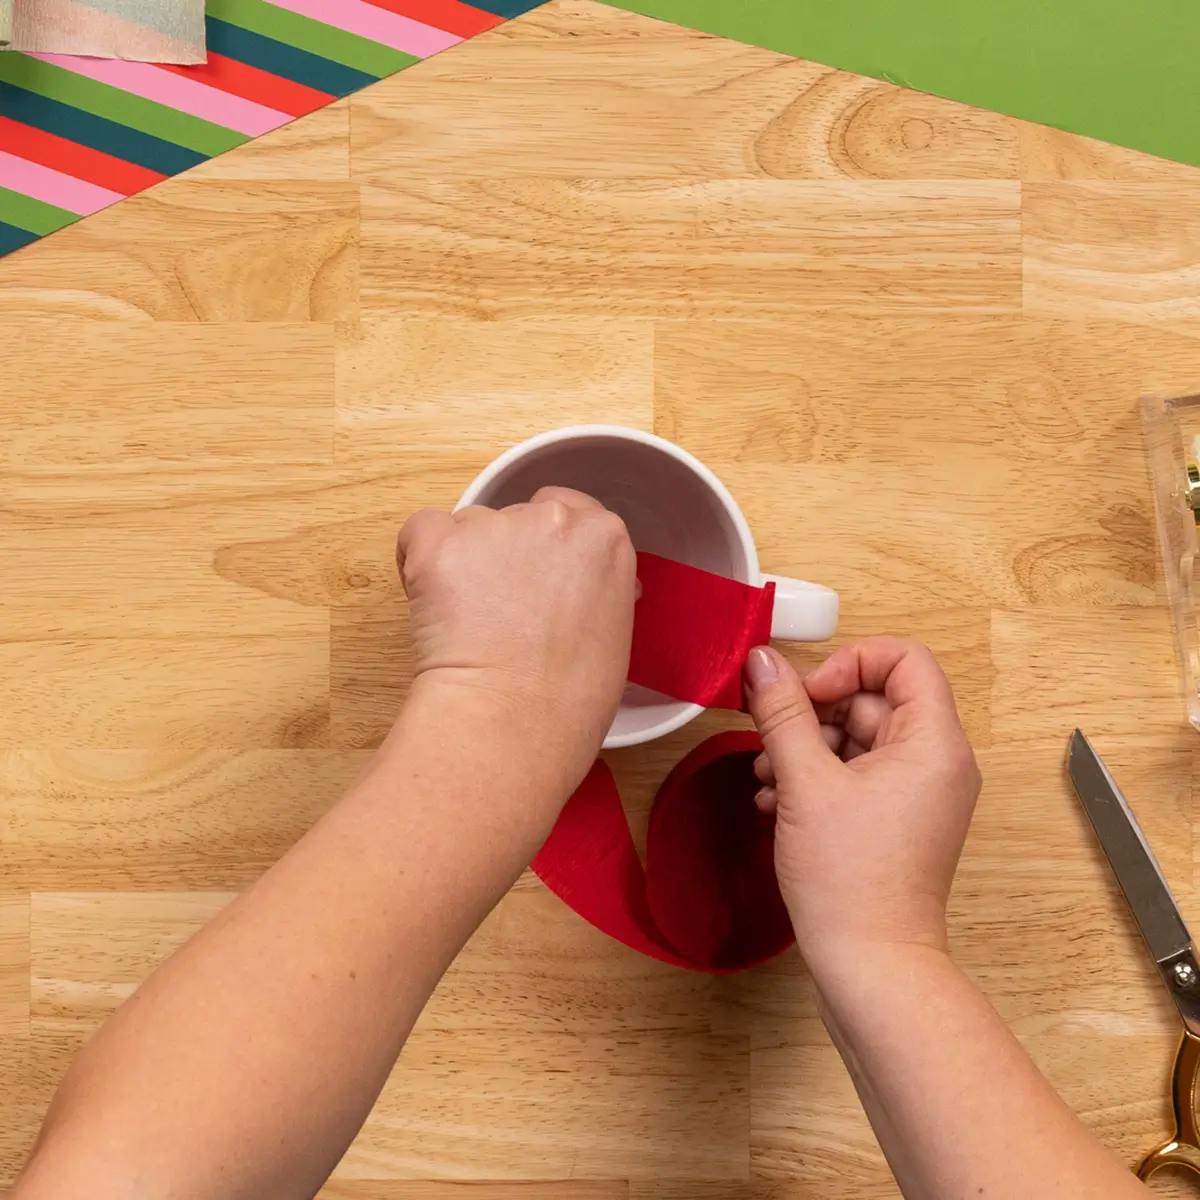 Attaching the first strip of crepe paper to the mug with double-sided tape, as part of a tutorial on how to wrap a mug.